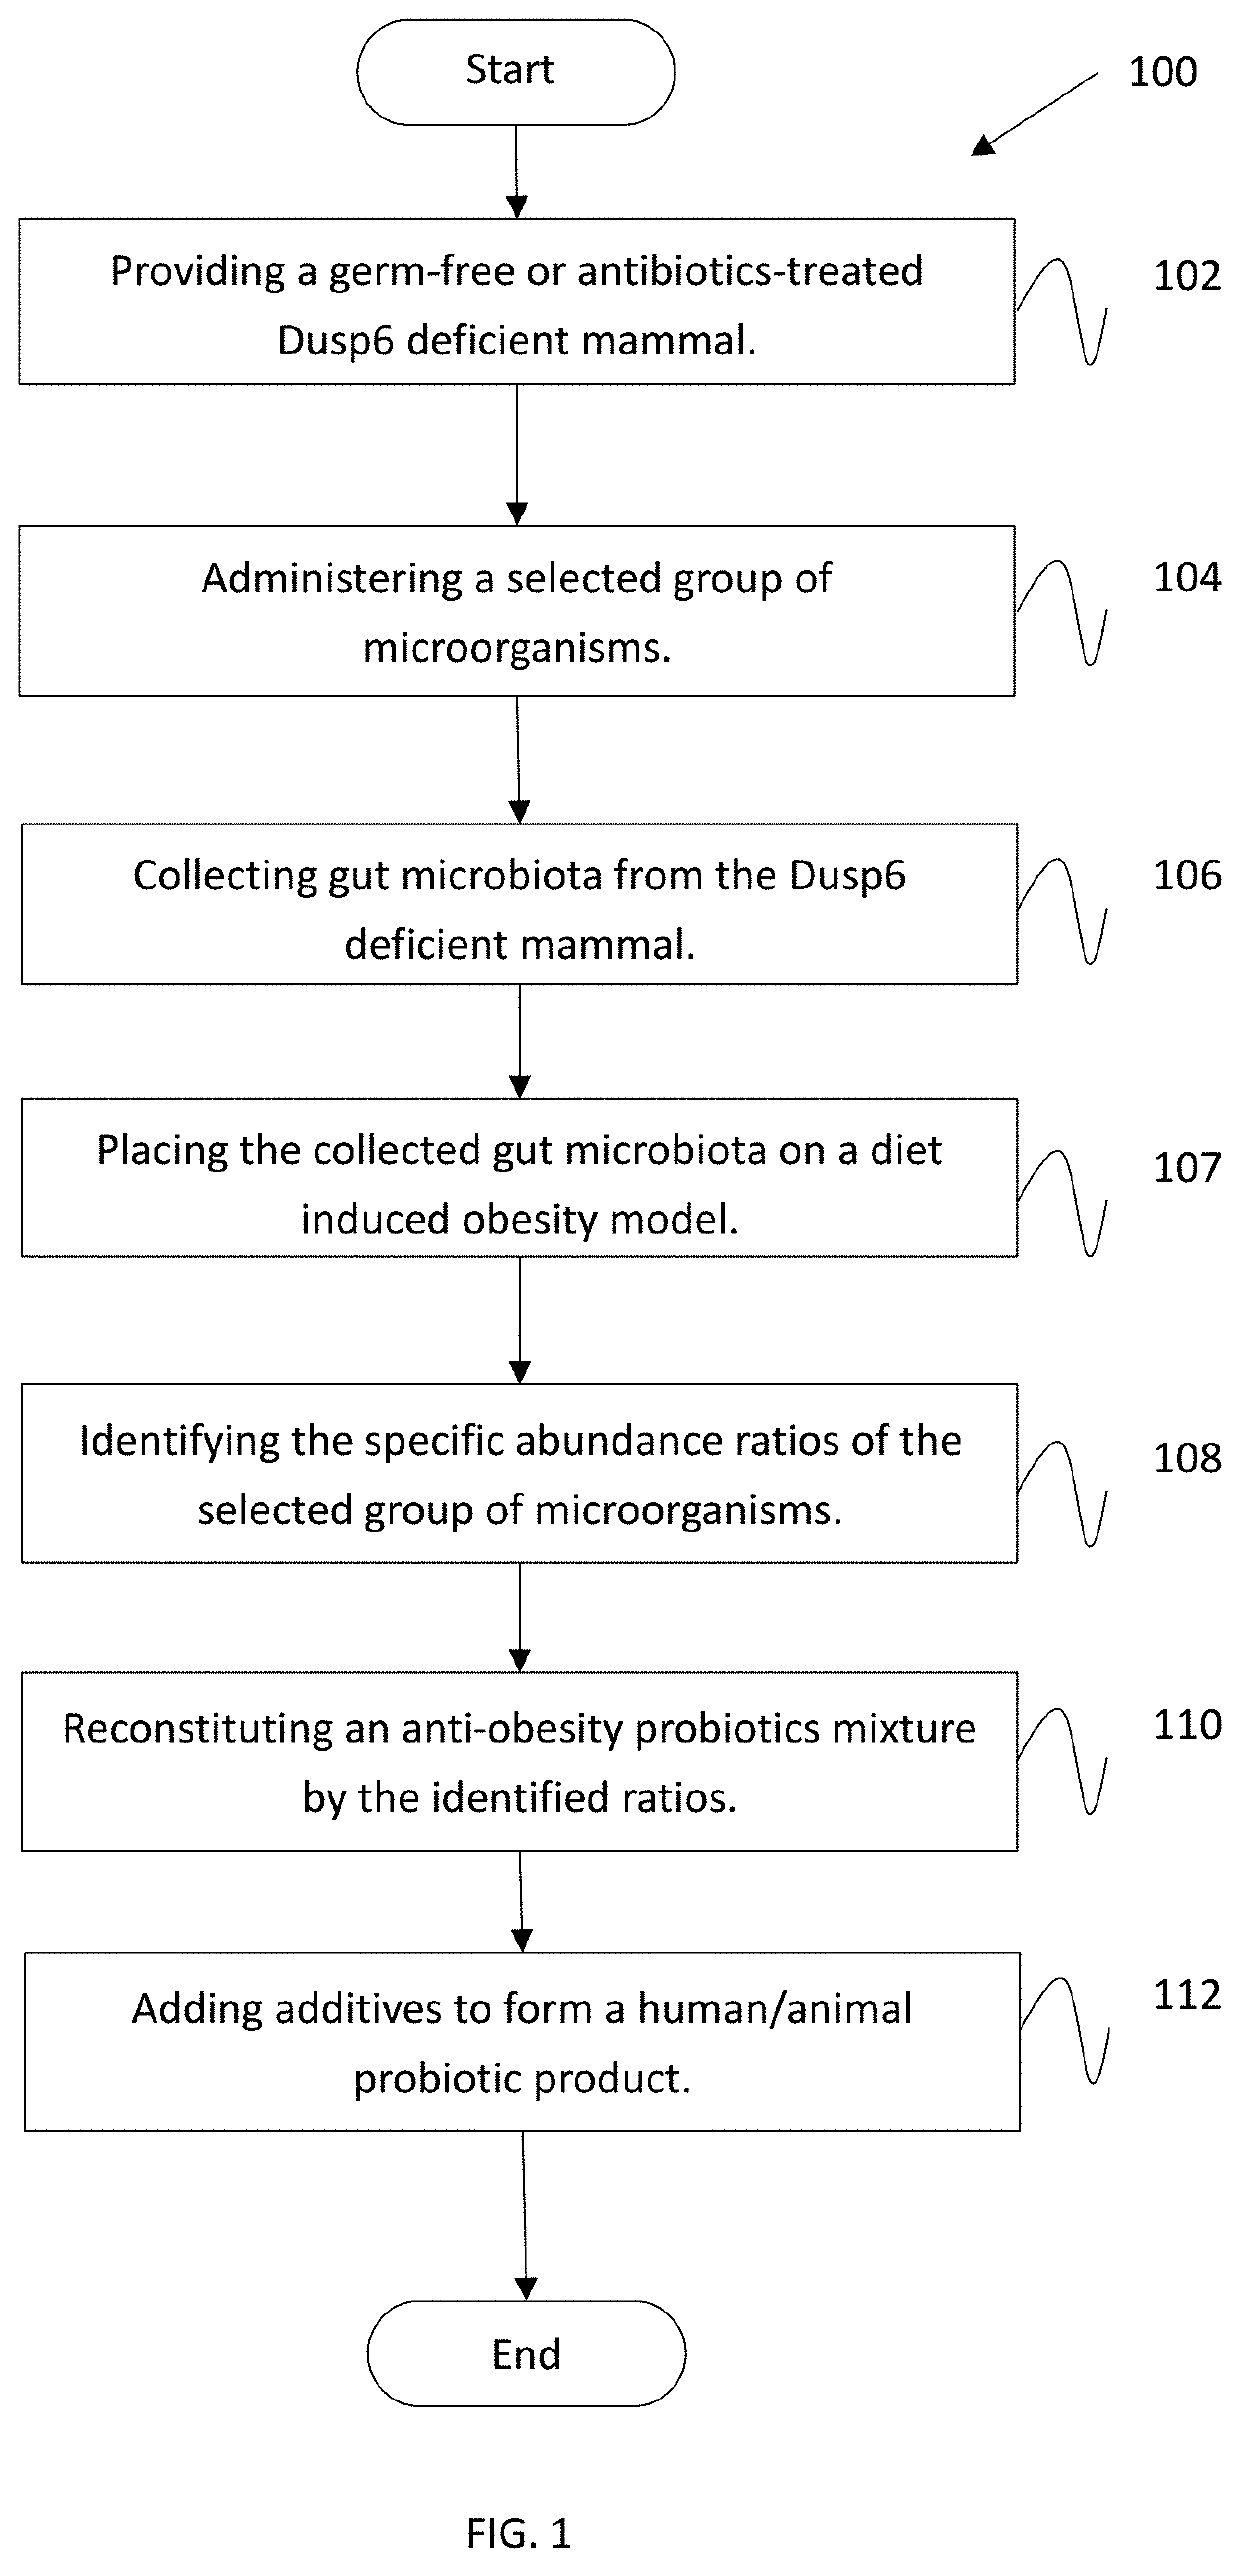 Blood glucose control and Anti-obesity probiotics compositions in a specific selection and ratio